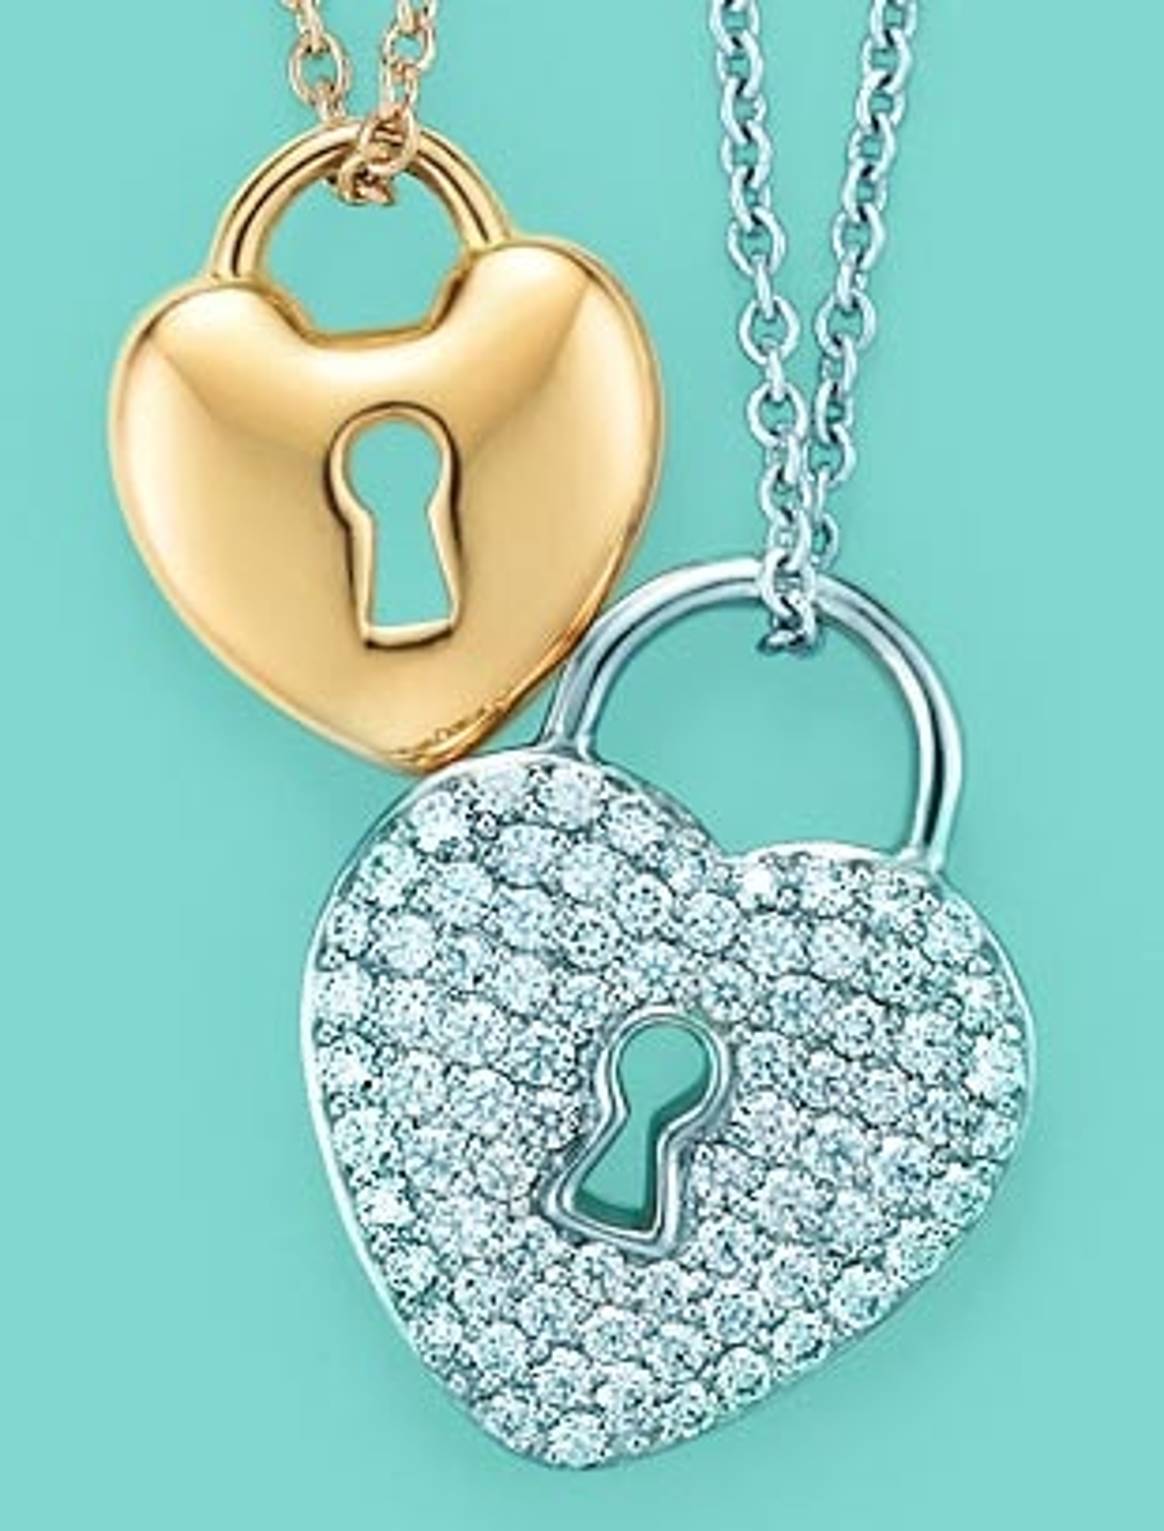 Tiffany & Co is back on track: higher sales and profit 2012